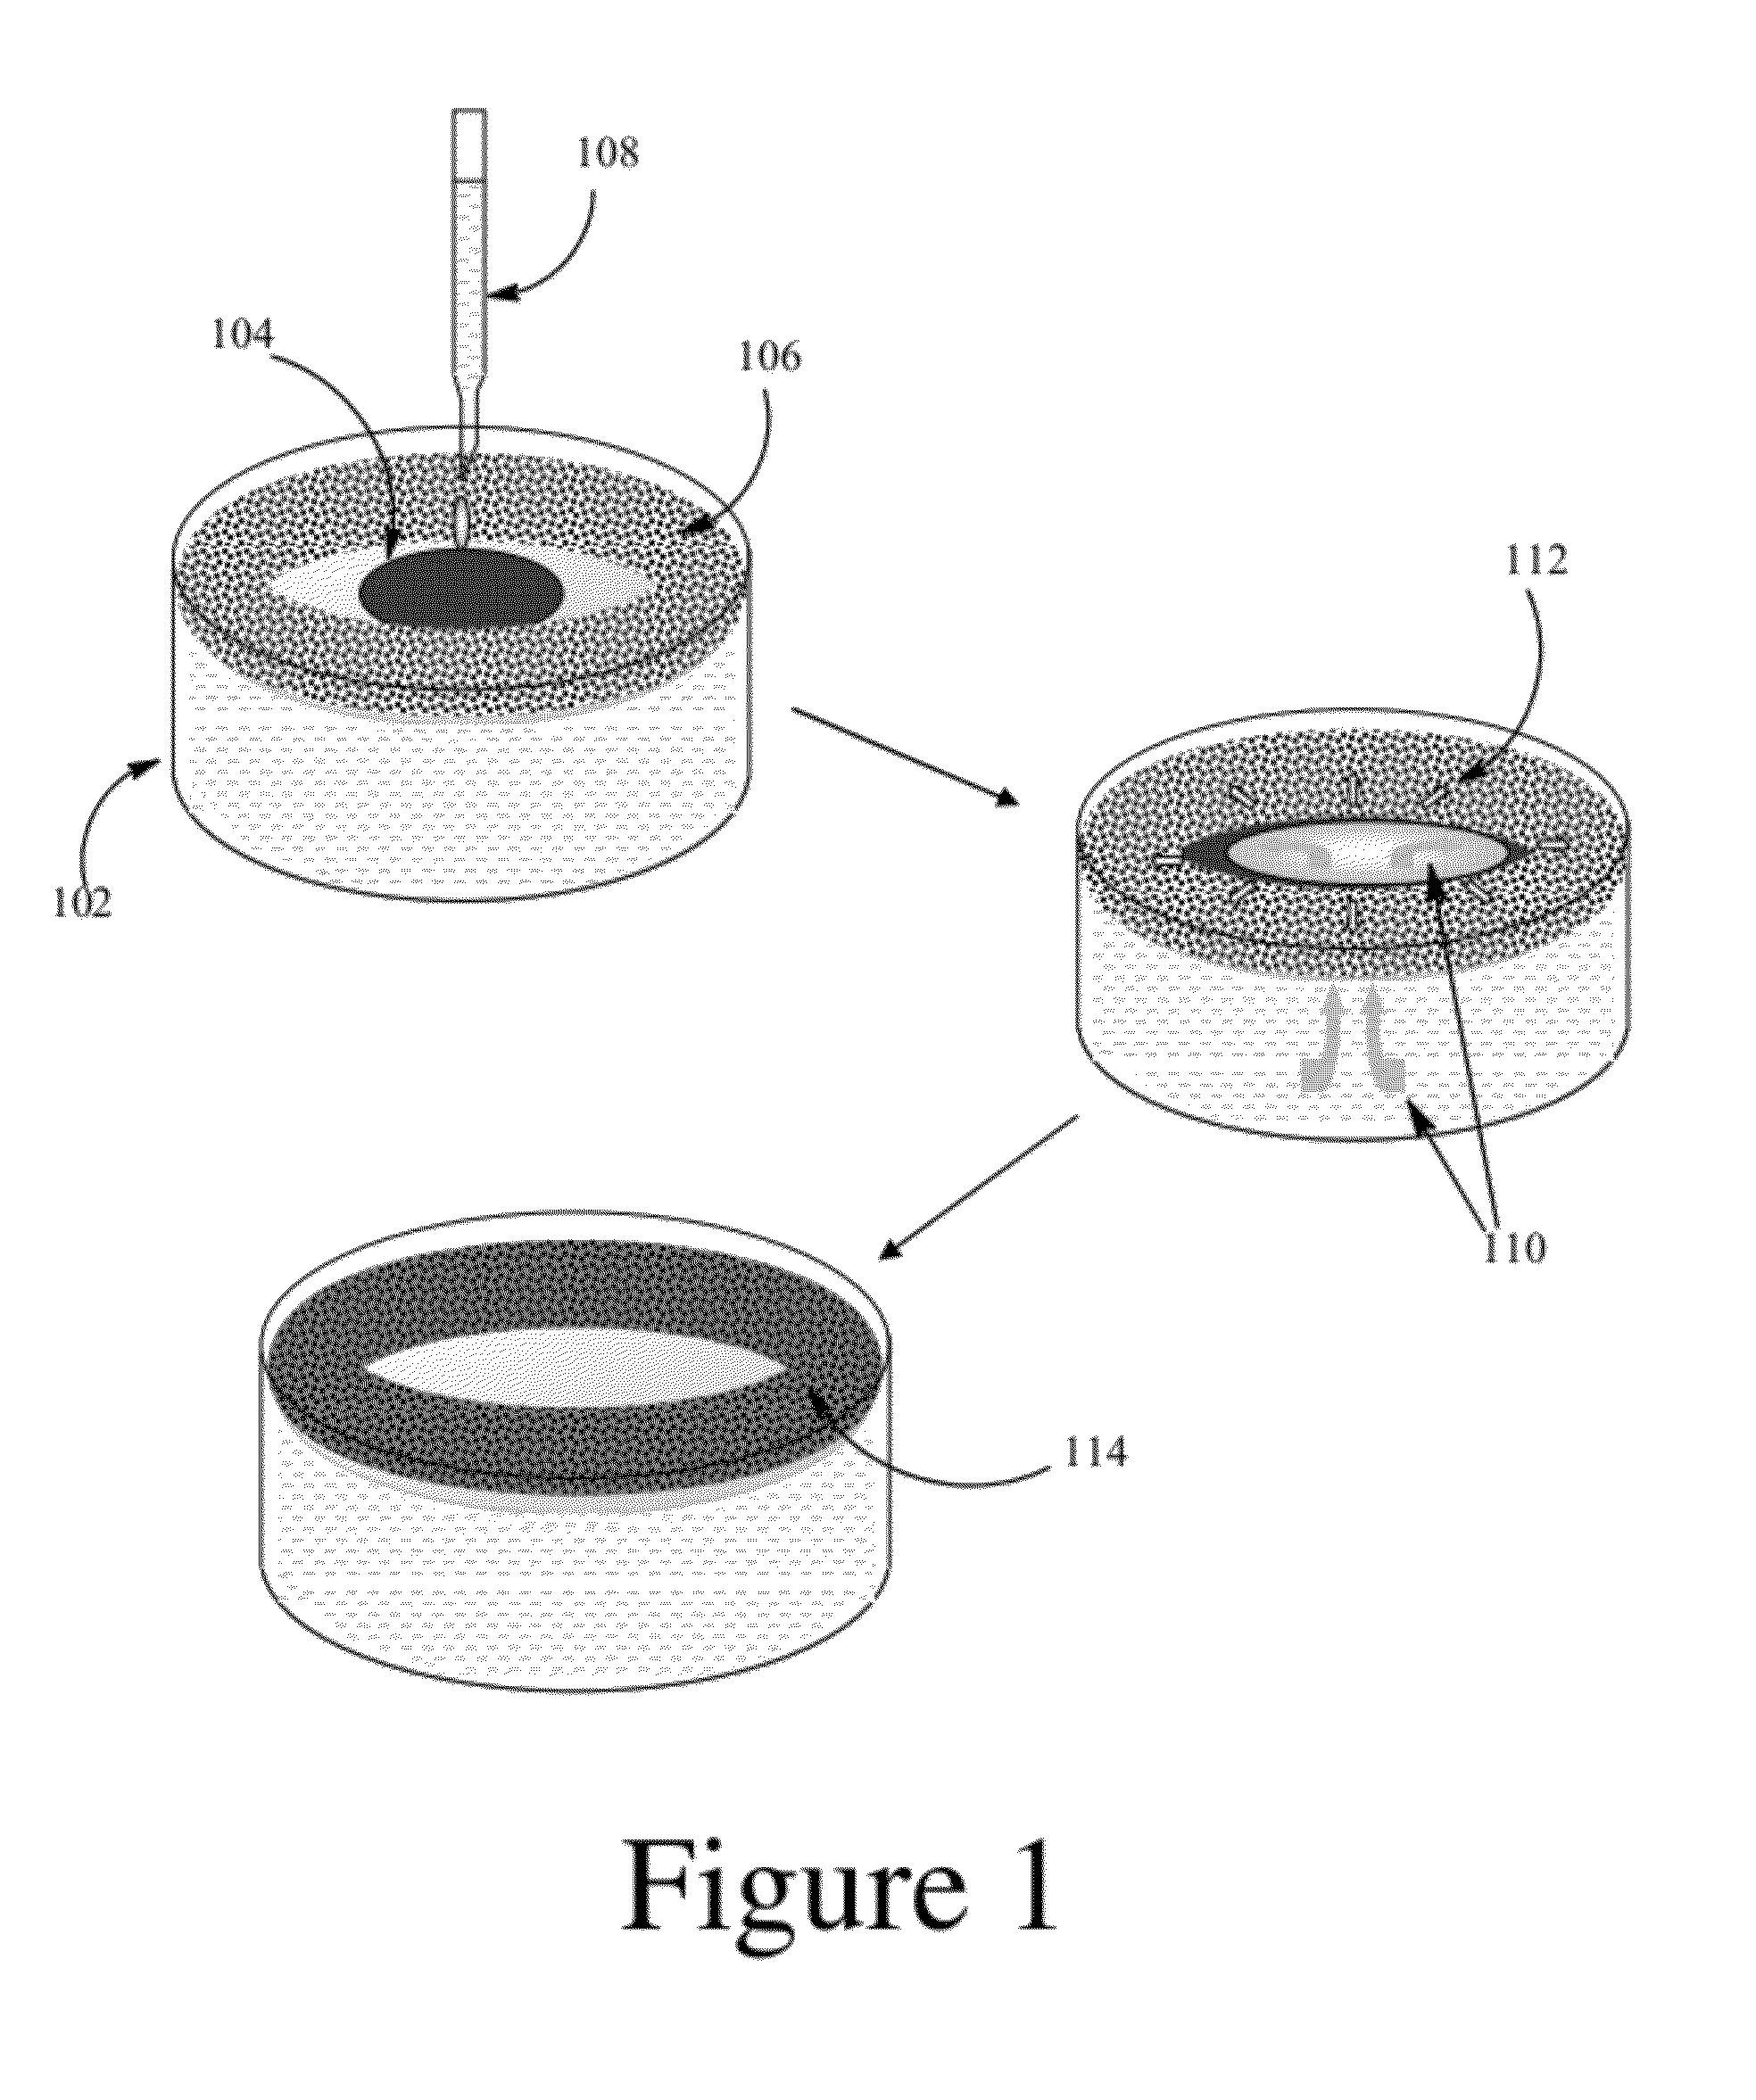 Method of herding and collection of oil spilled at the aquatic surface